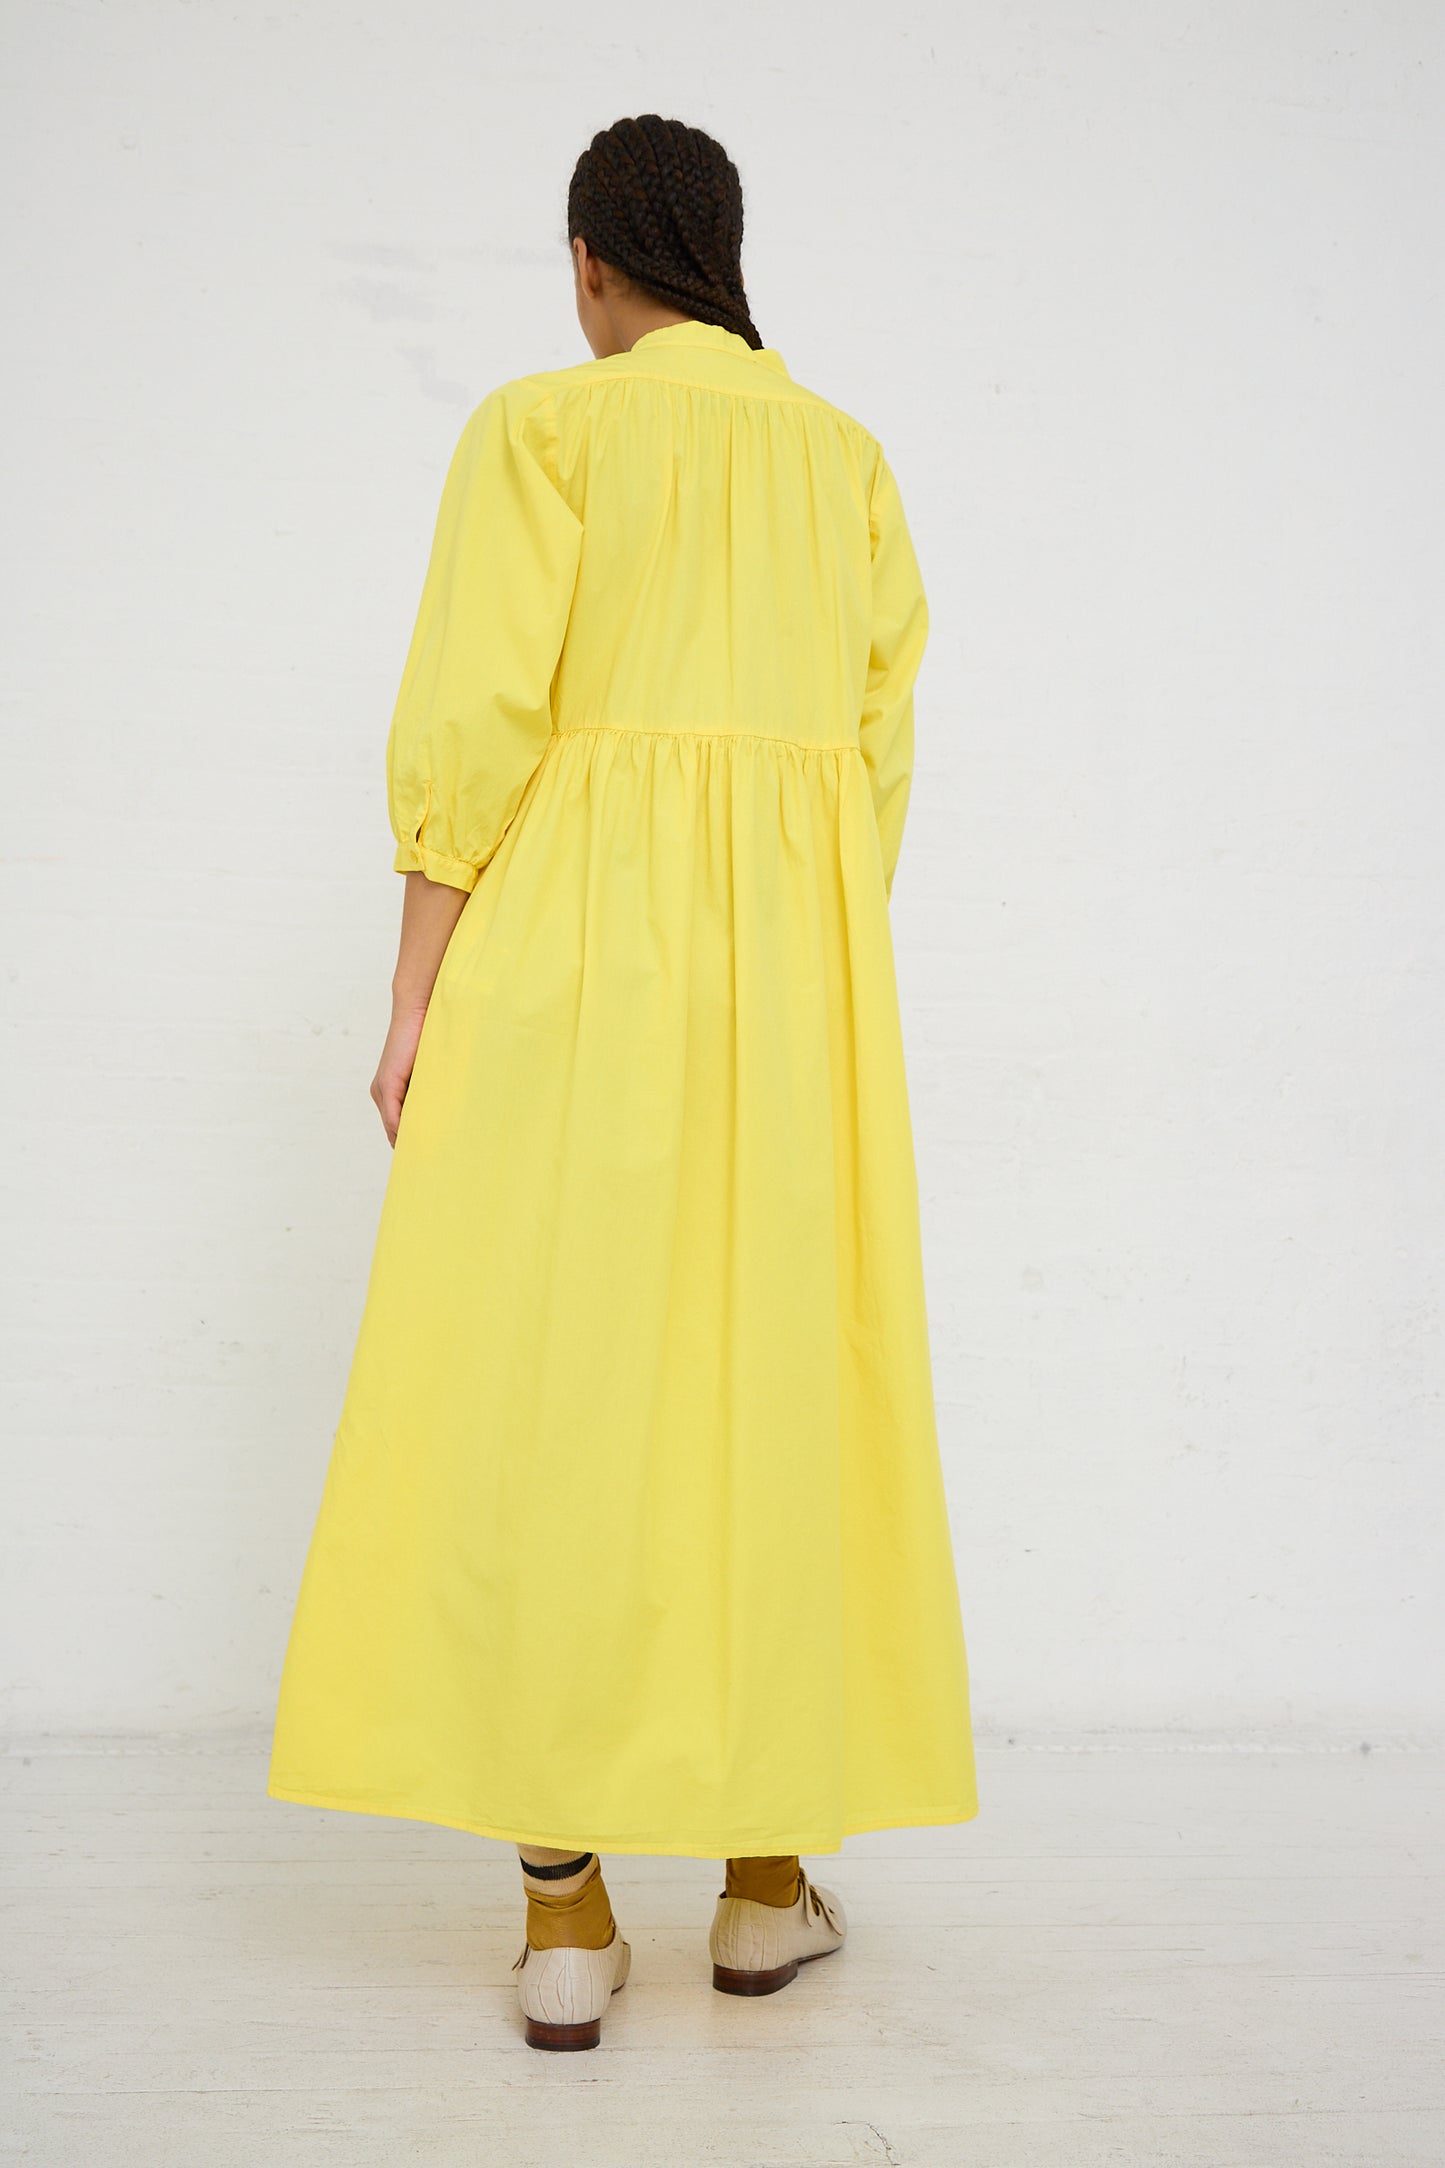 Woman in an AVN Sunshine Dress in Yellow, a long-sleeve, lightweight cotton maxi dress, viewed from behind against a white background.